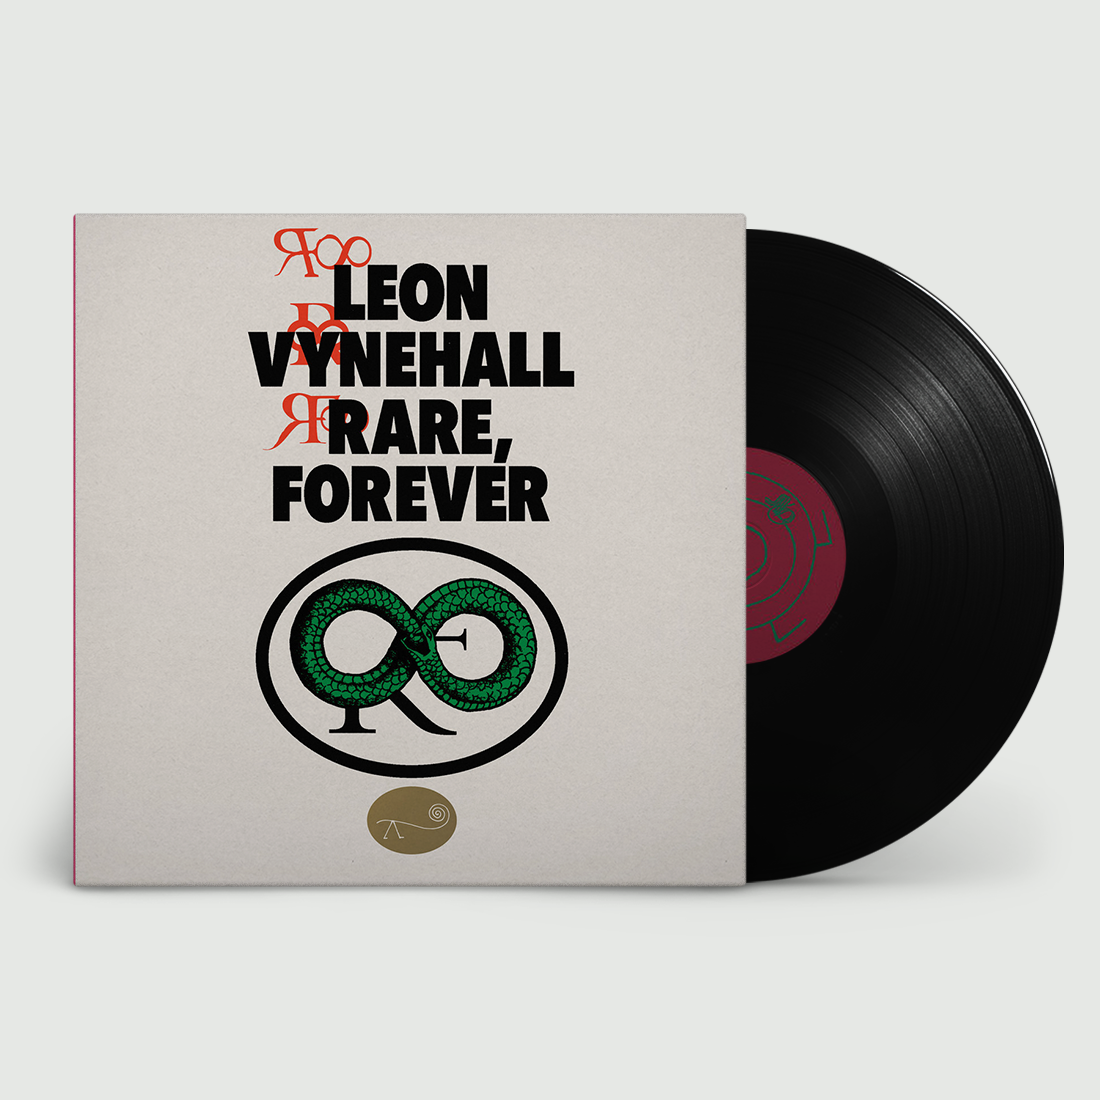 Leon Vynehall - Rare, Forever: Signed Exclusive Vinyl LP